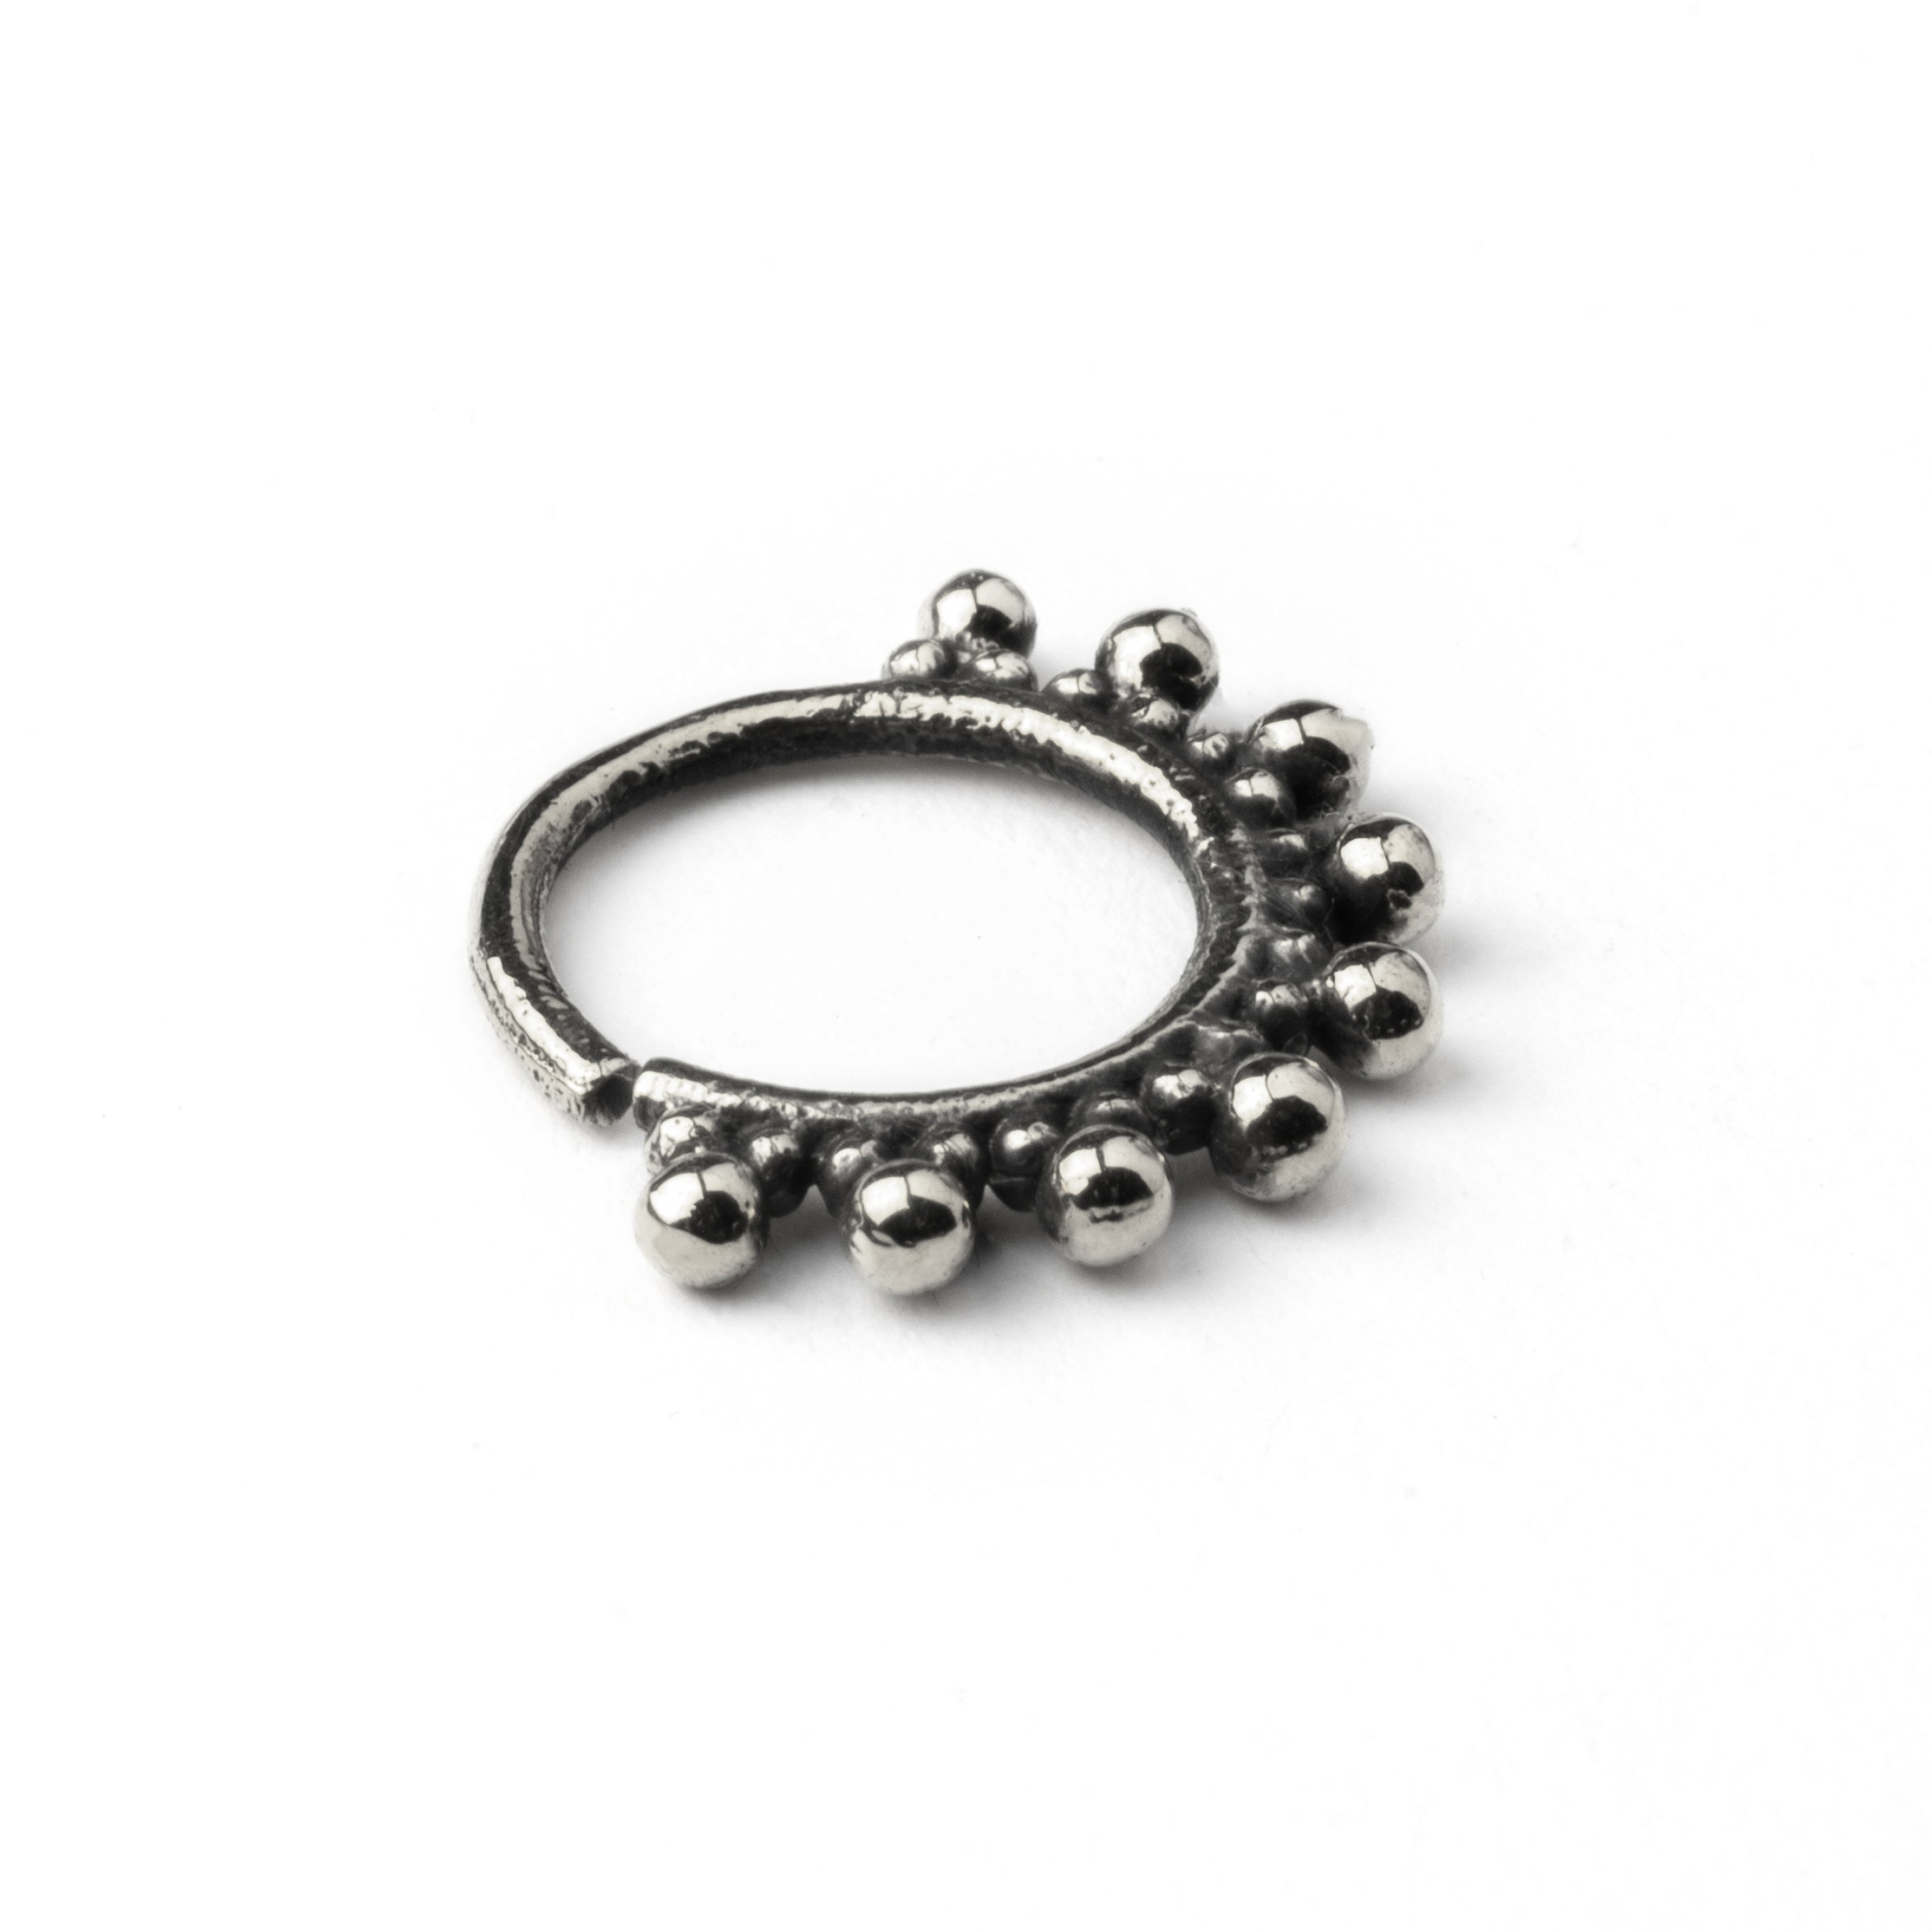 Indira silver septum ring left side view